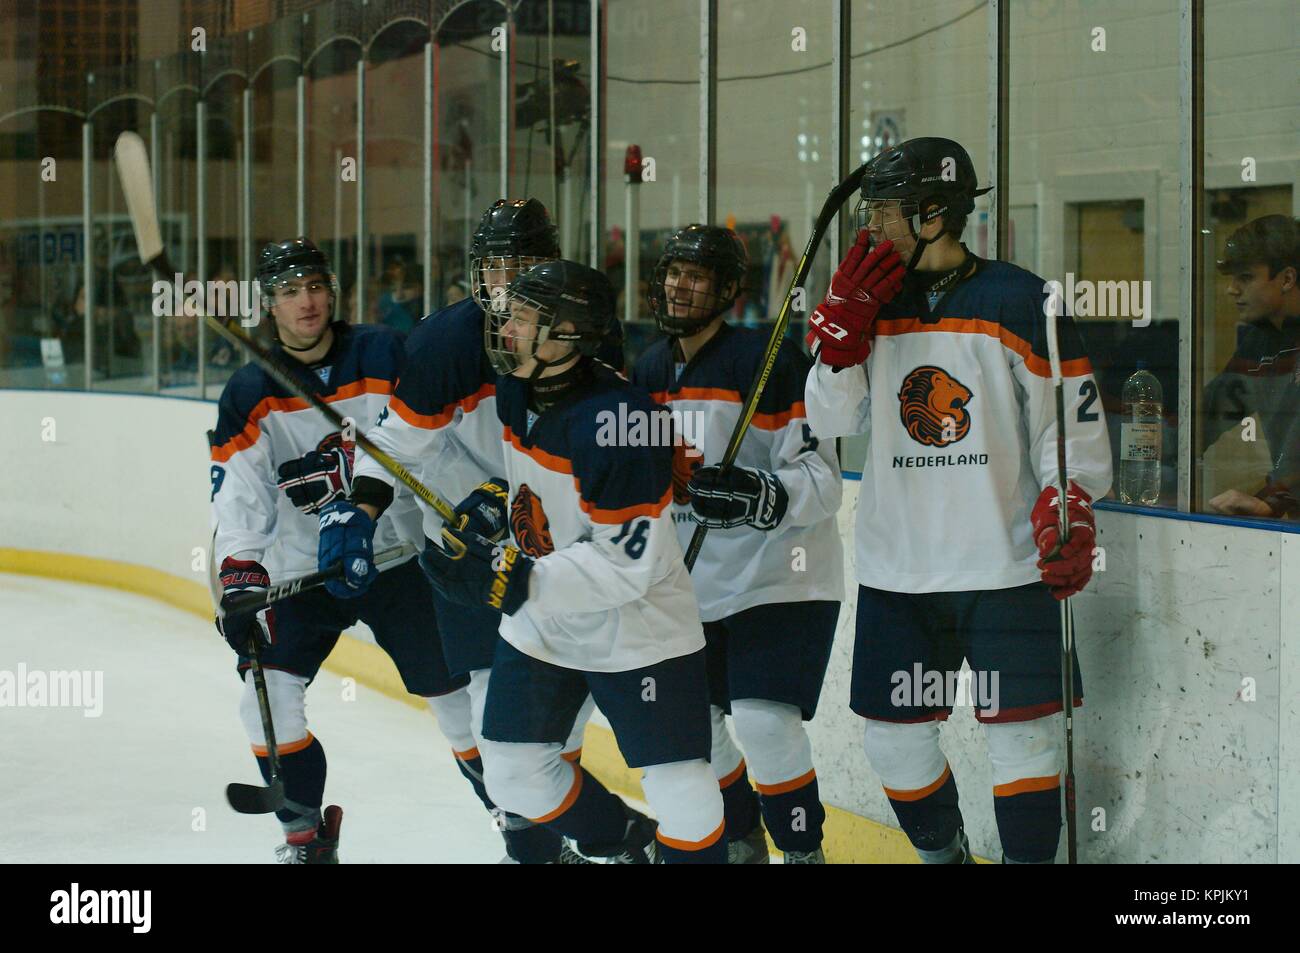 Dumfries, Scotland, 16 December 2017. L to R Levi Smeets, Bob Gerretsen, Wouter Sars, goal scorer, Jorn van Soest and Ties van Soest of Netherlands celebrating after scoring against Estonia in their 2018 IIHF Ice Hockey U20 World Championship Division II, Group A, match at Dumfries. Credit: Colin Edwards/Alamy Live News. Stock Photo